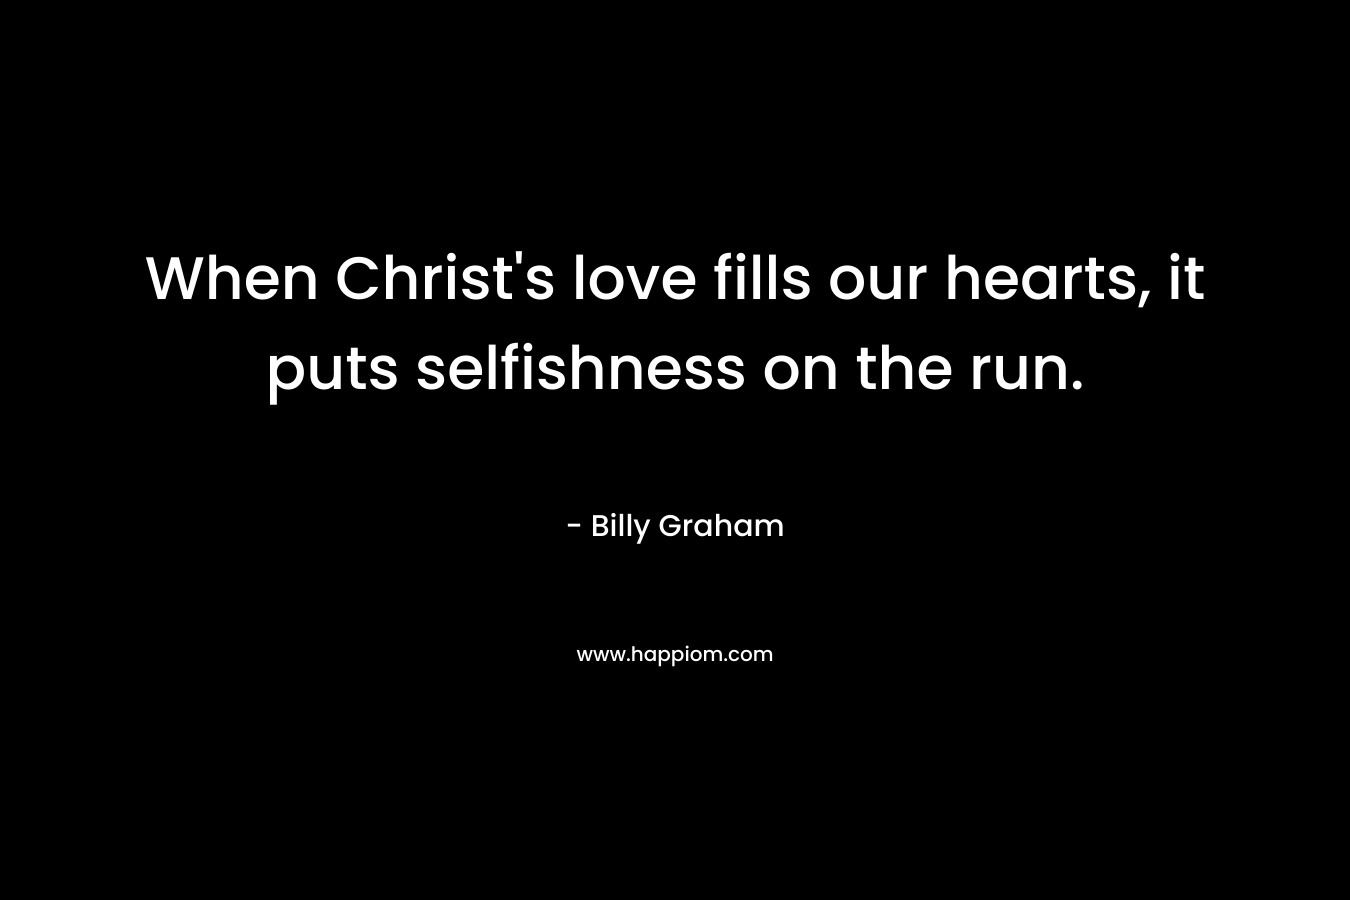 When Christ’s love fills our hearts, it puts selfishness on the run. – Billy Graham